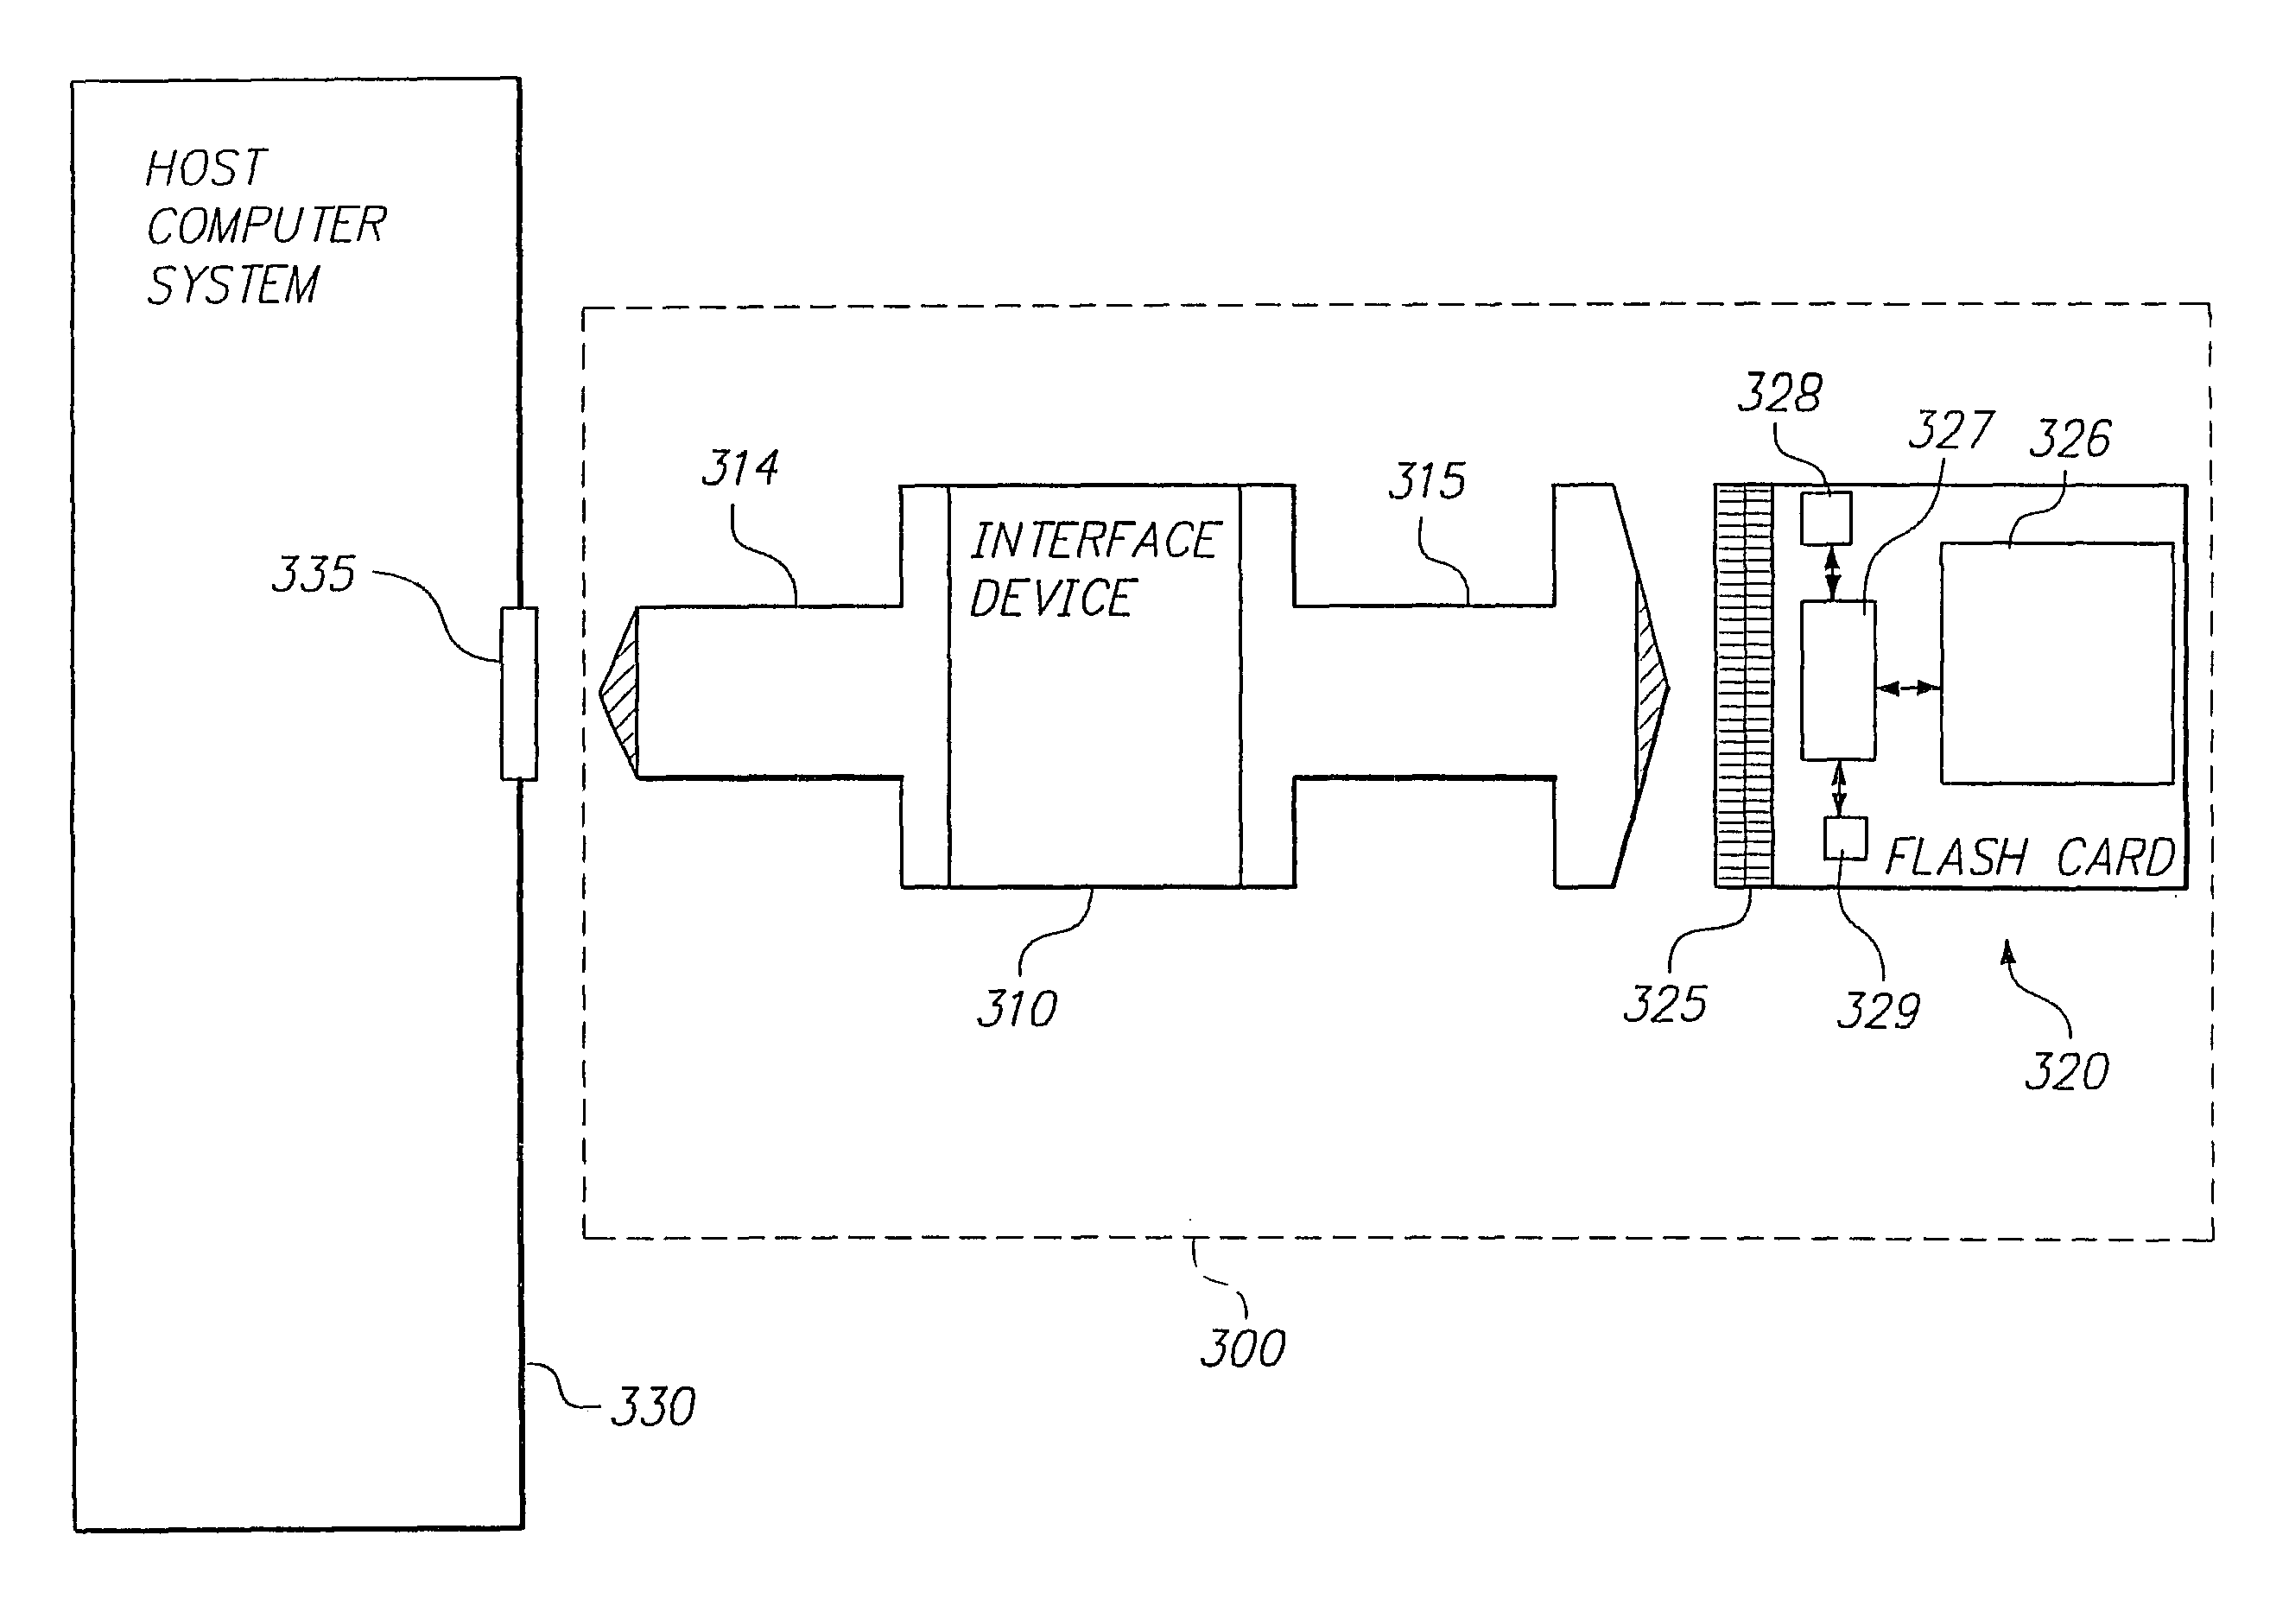 Flash memory card with enhanced operating mode detection and user-friendly interfacing system